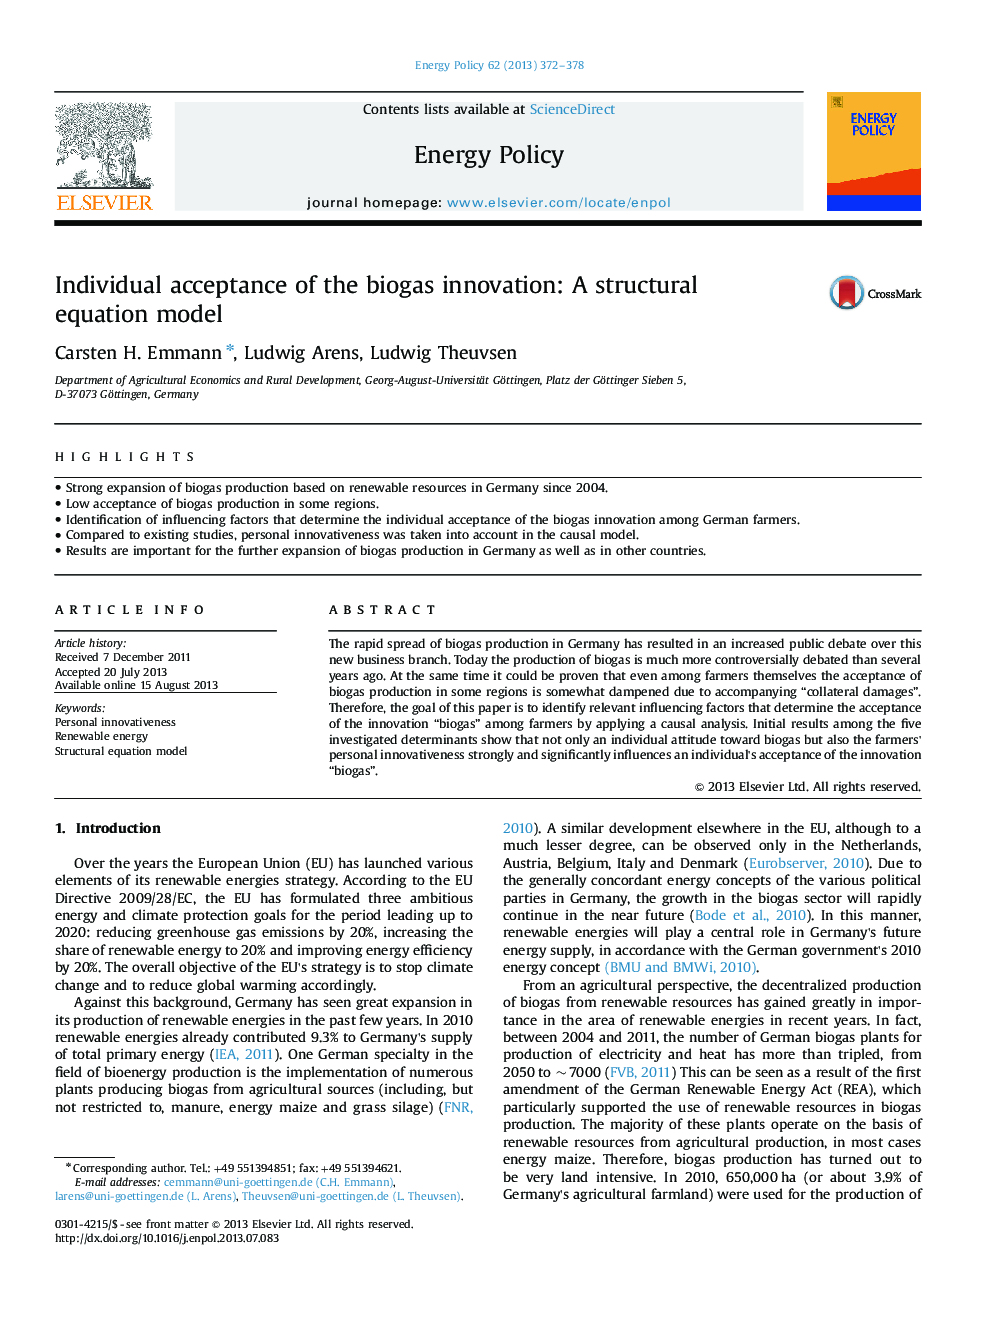 Individual acceptance of the biogas innovation: A structural equation model